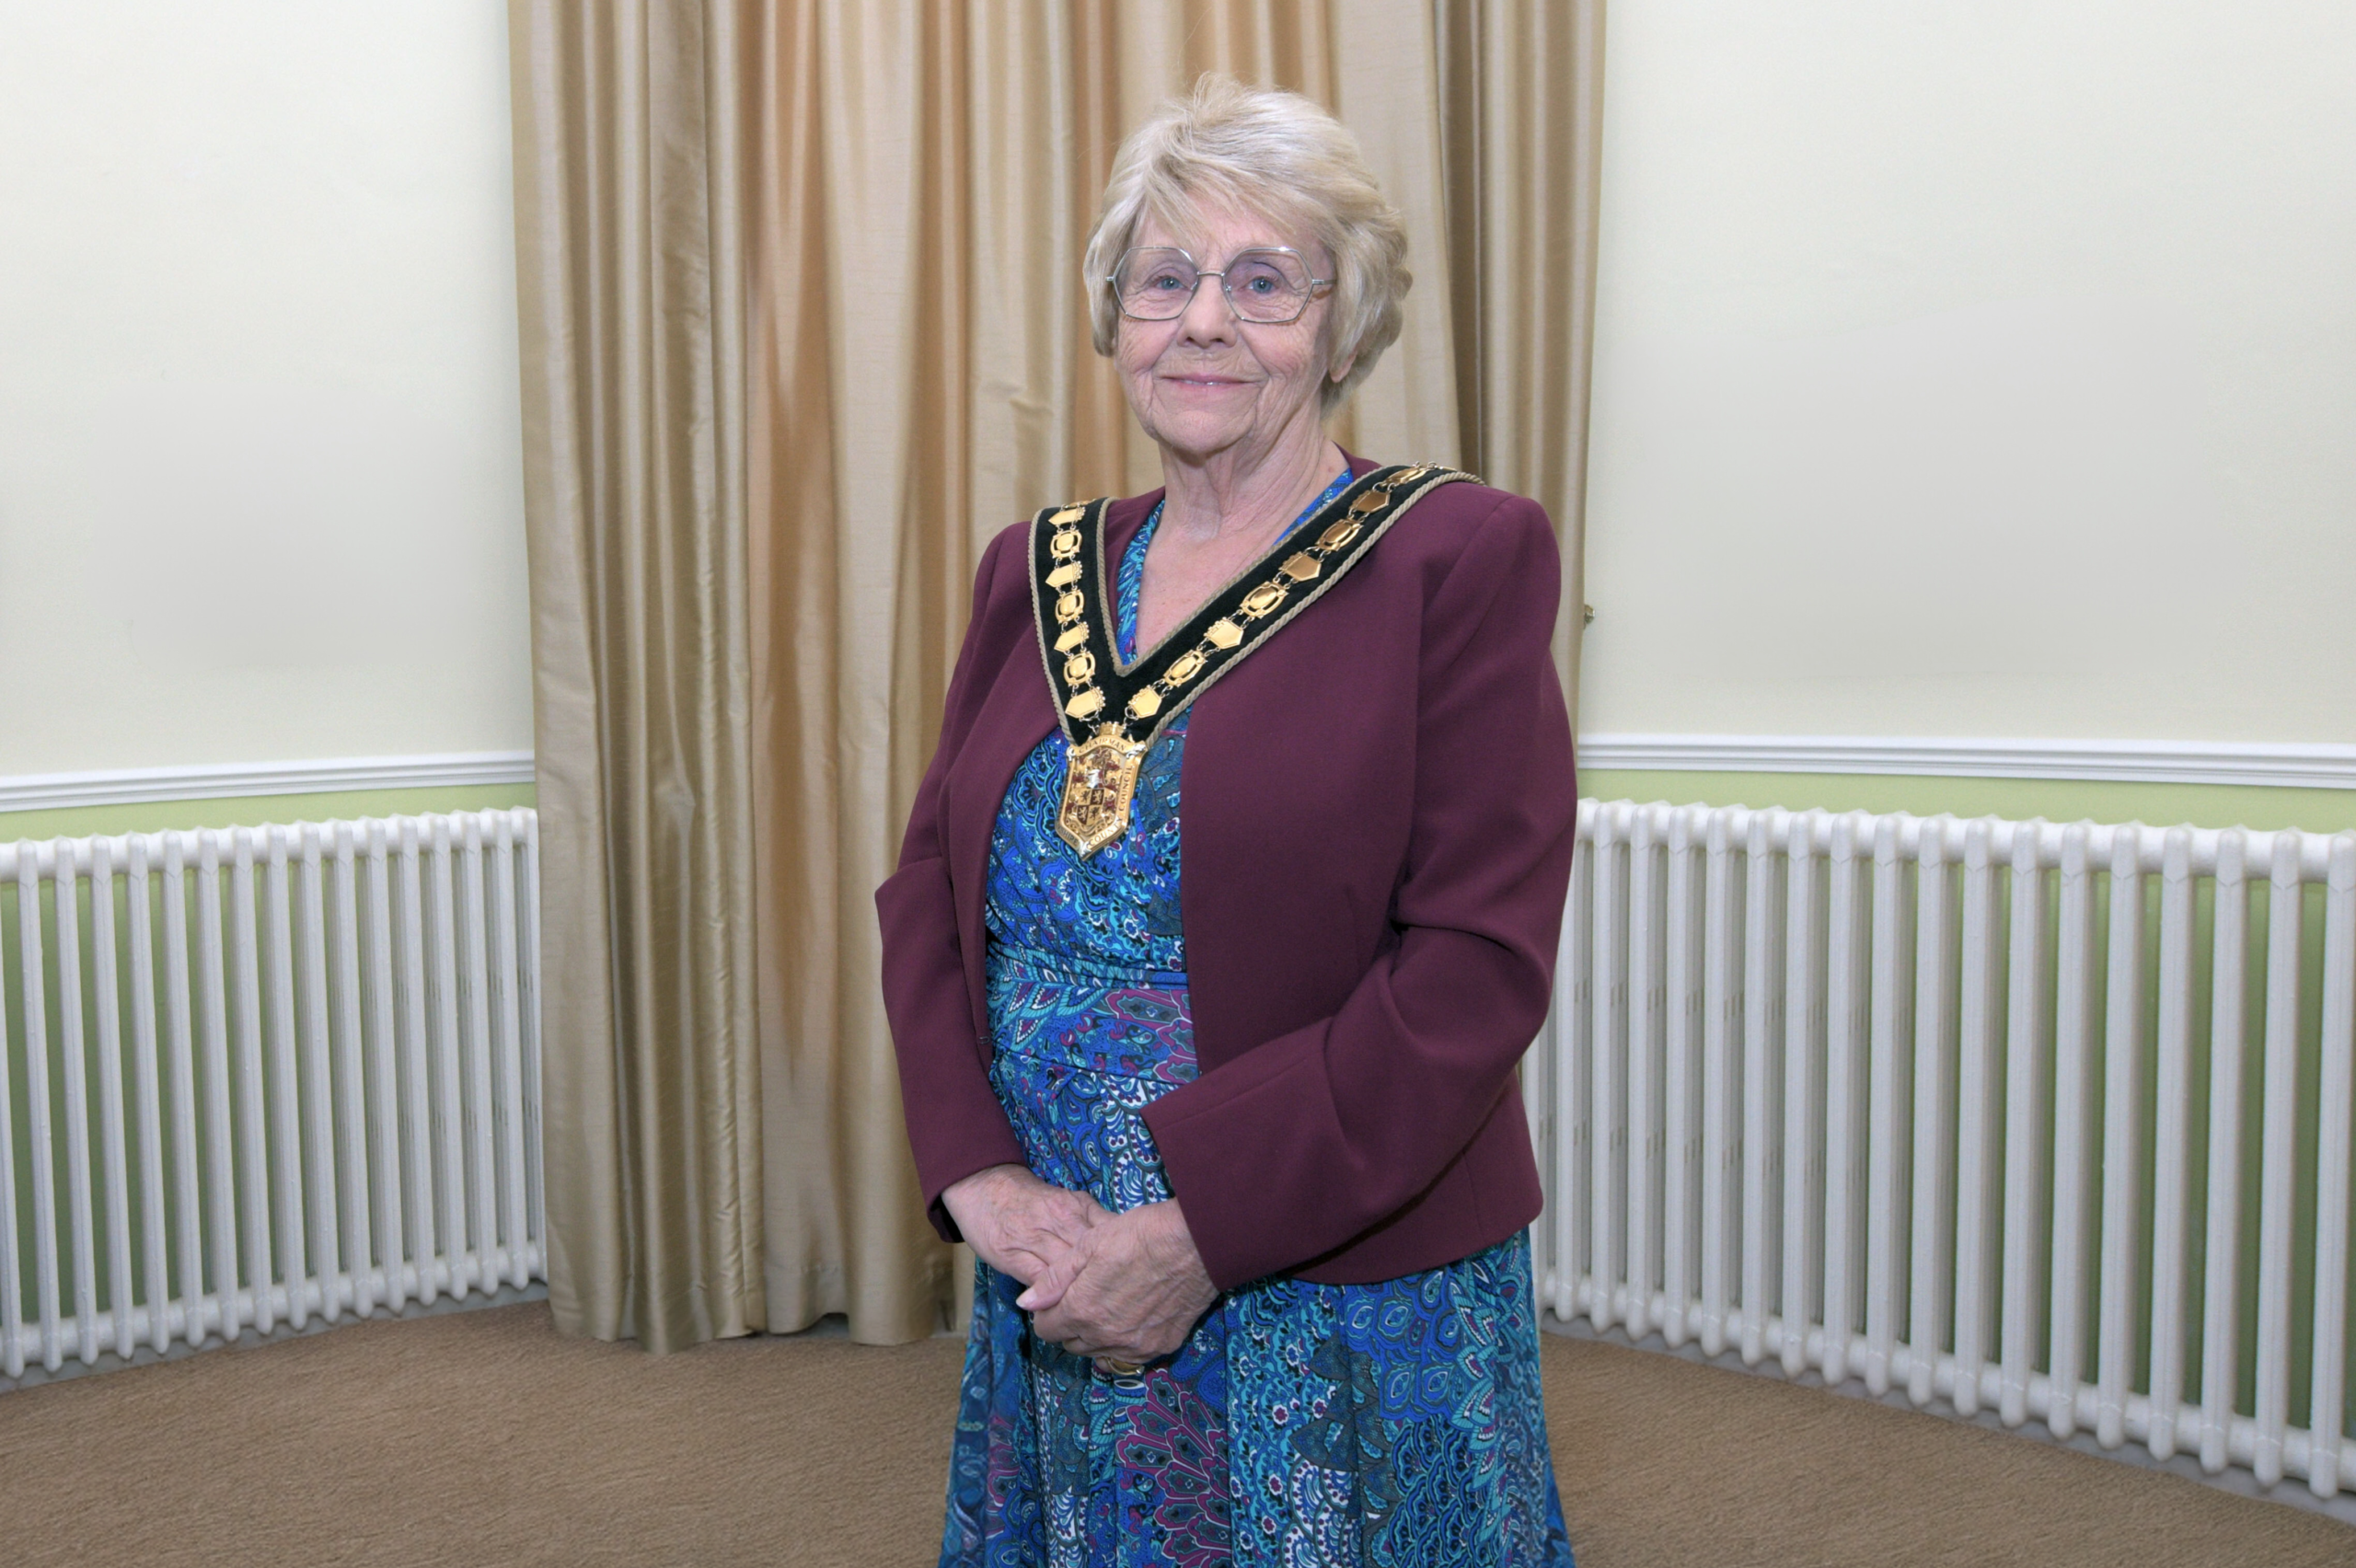 Cllr. Louvain Roberts elected as new County Council Chair